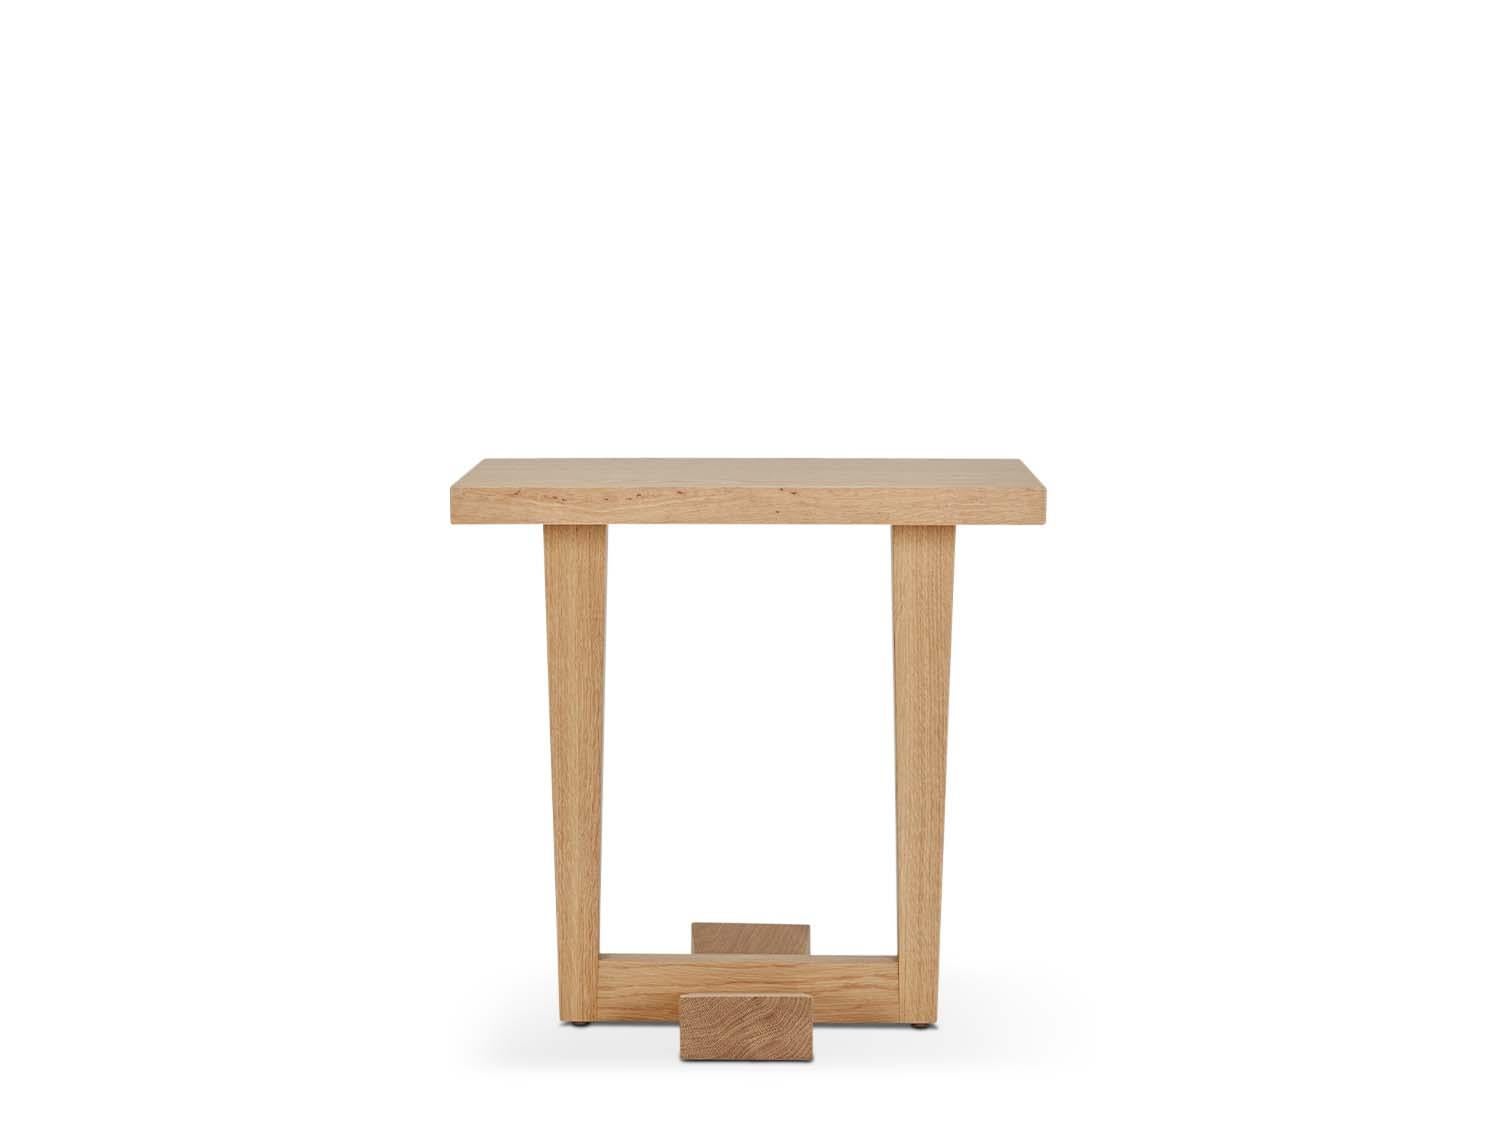 The Rialto Side Table is made from American walnut or white oak and features an architectural base.

The Lawson-Fenning Collection is designed and handmade in Los Angeles, California. Reach out to discover what options are currently in stock.